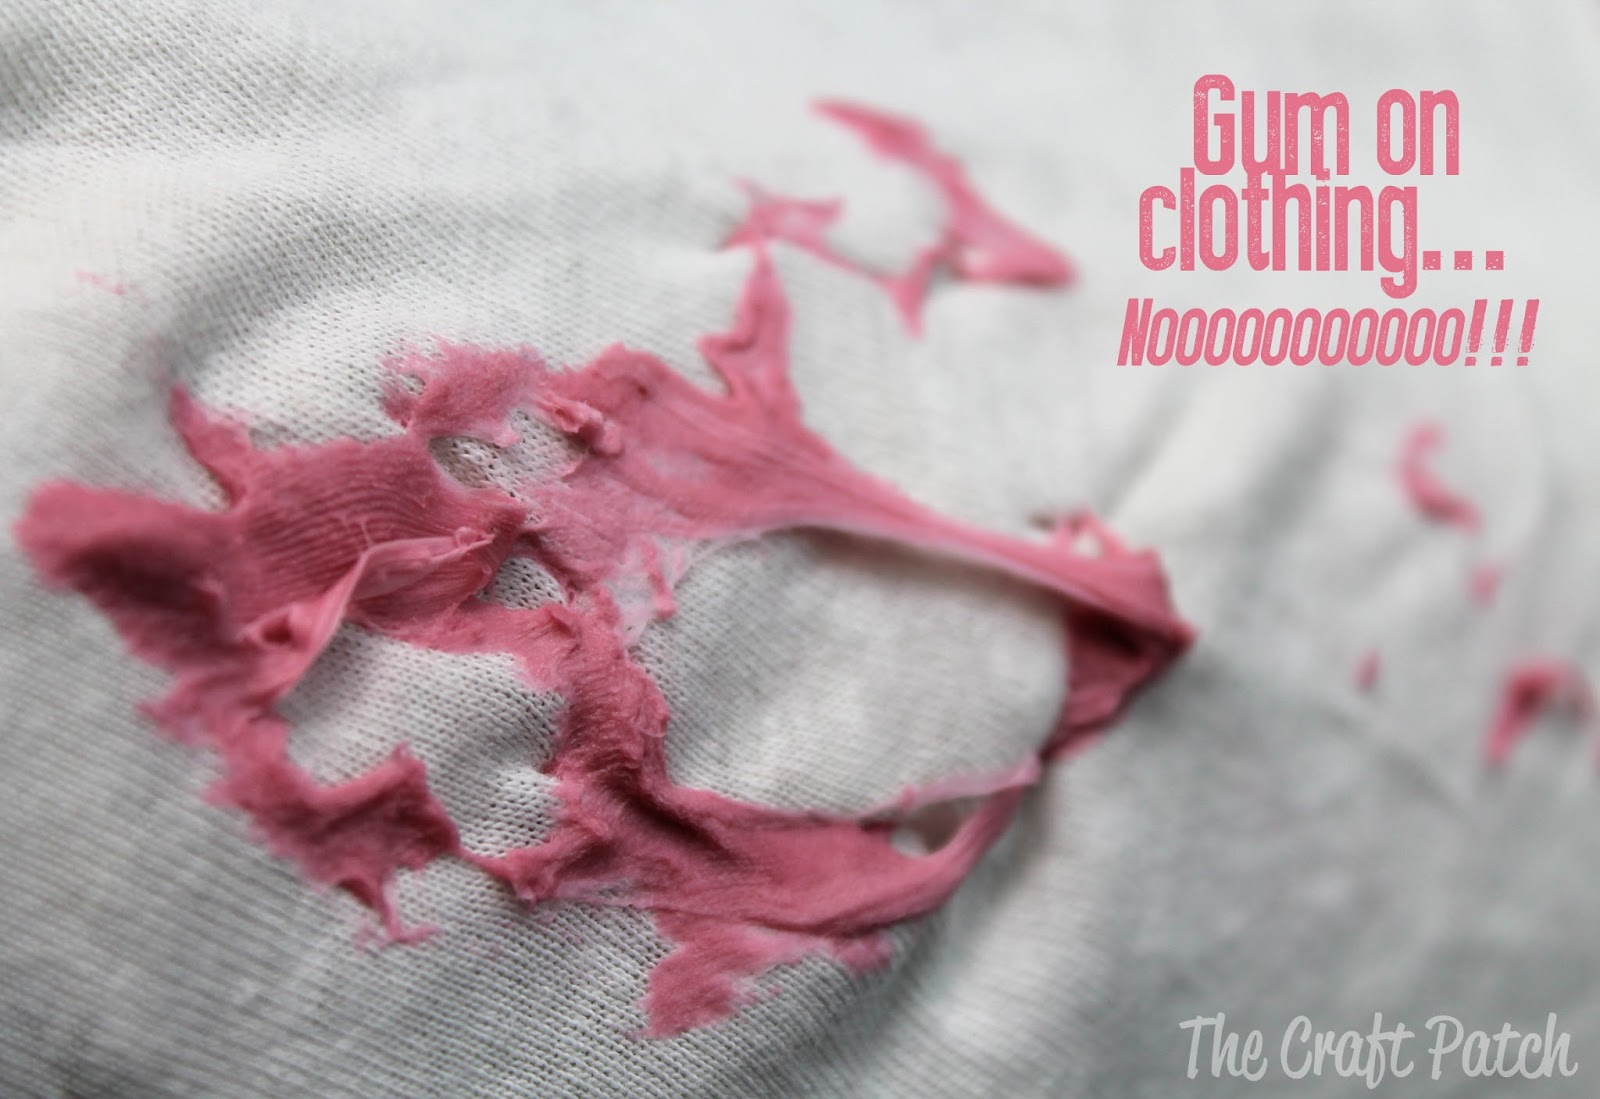 How do you remove chewing gum from jeans?